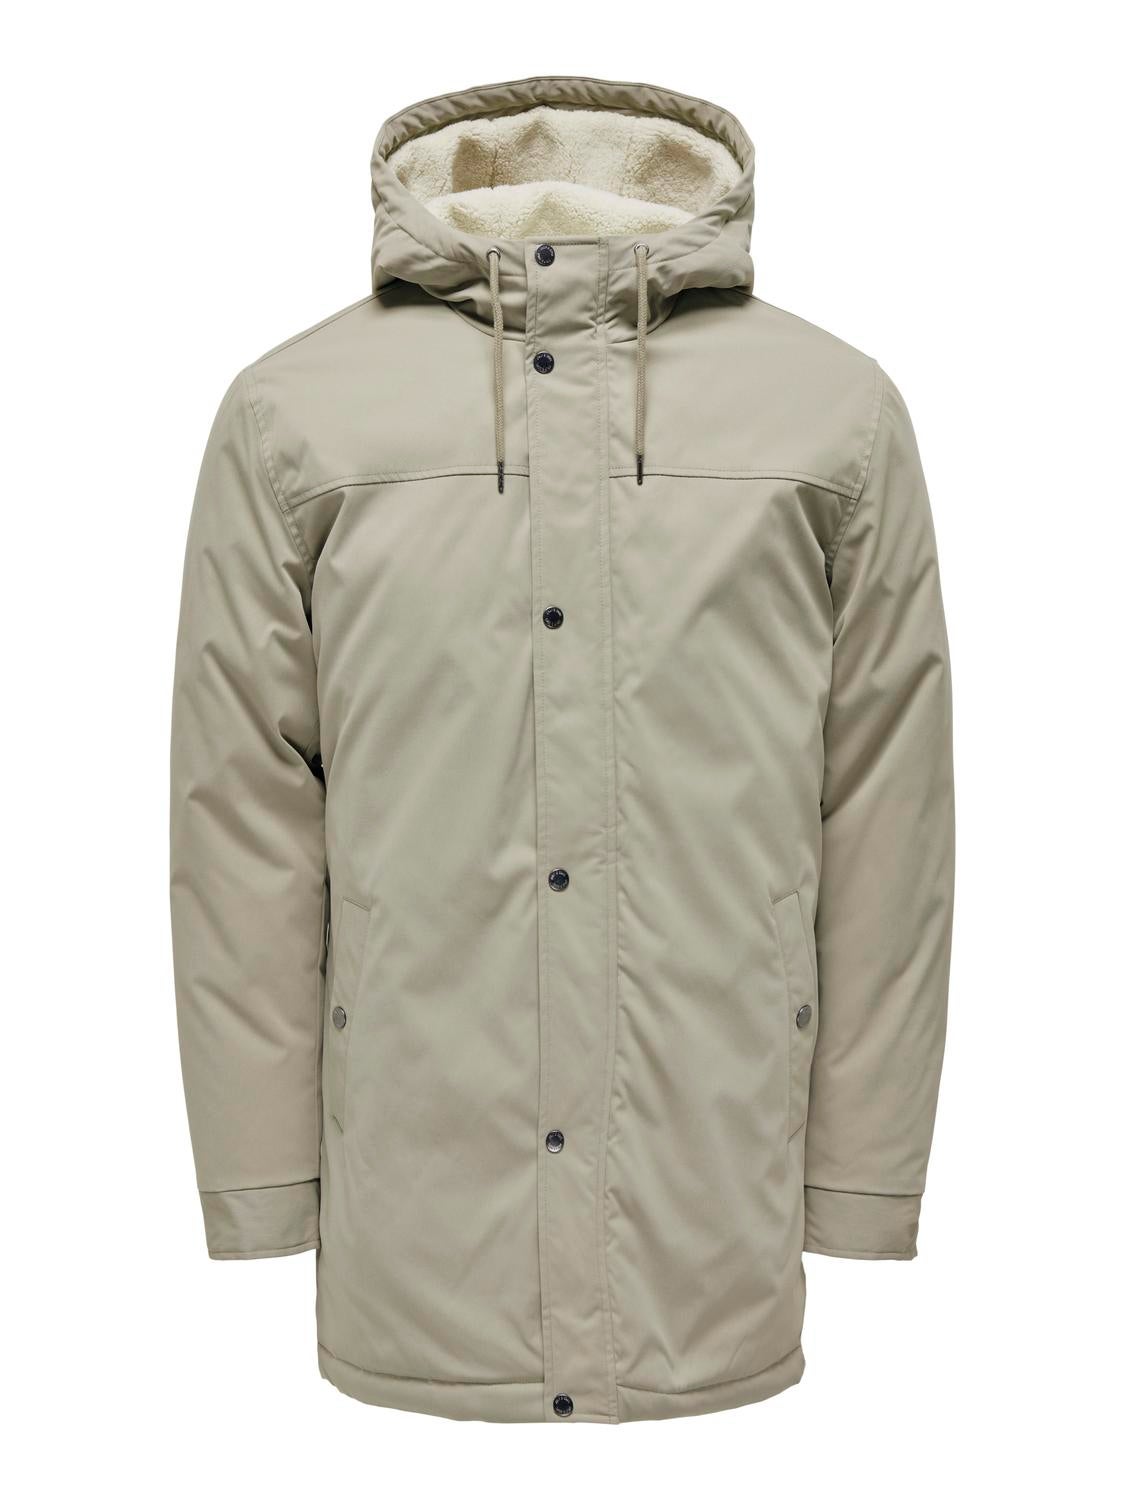 Hooded parka jacket with 30% discount! | ONLY & SONS®